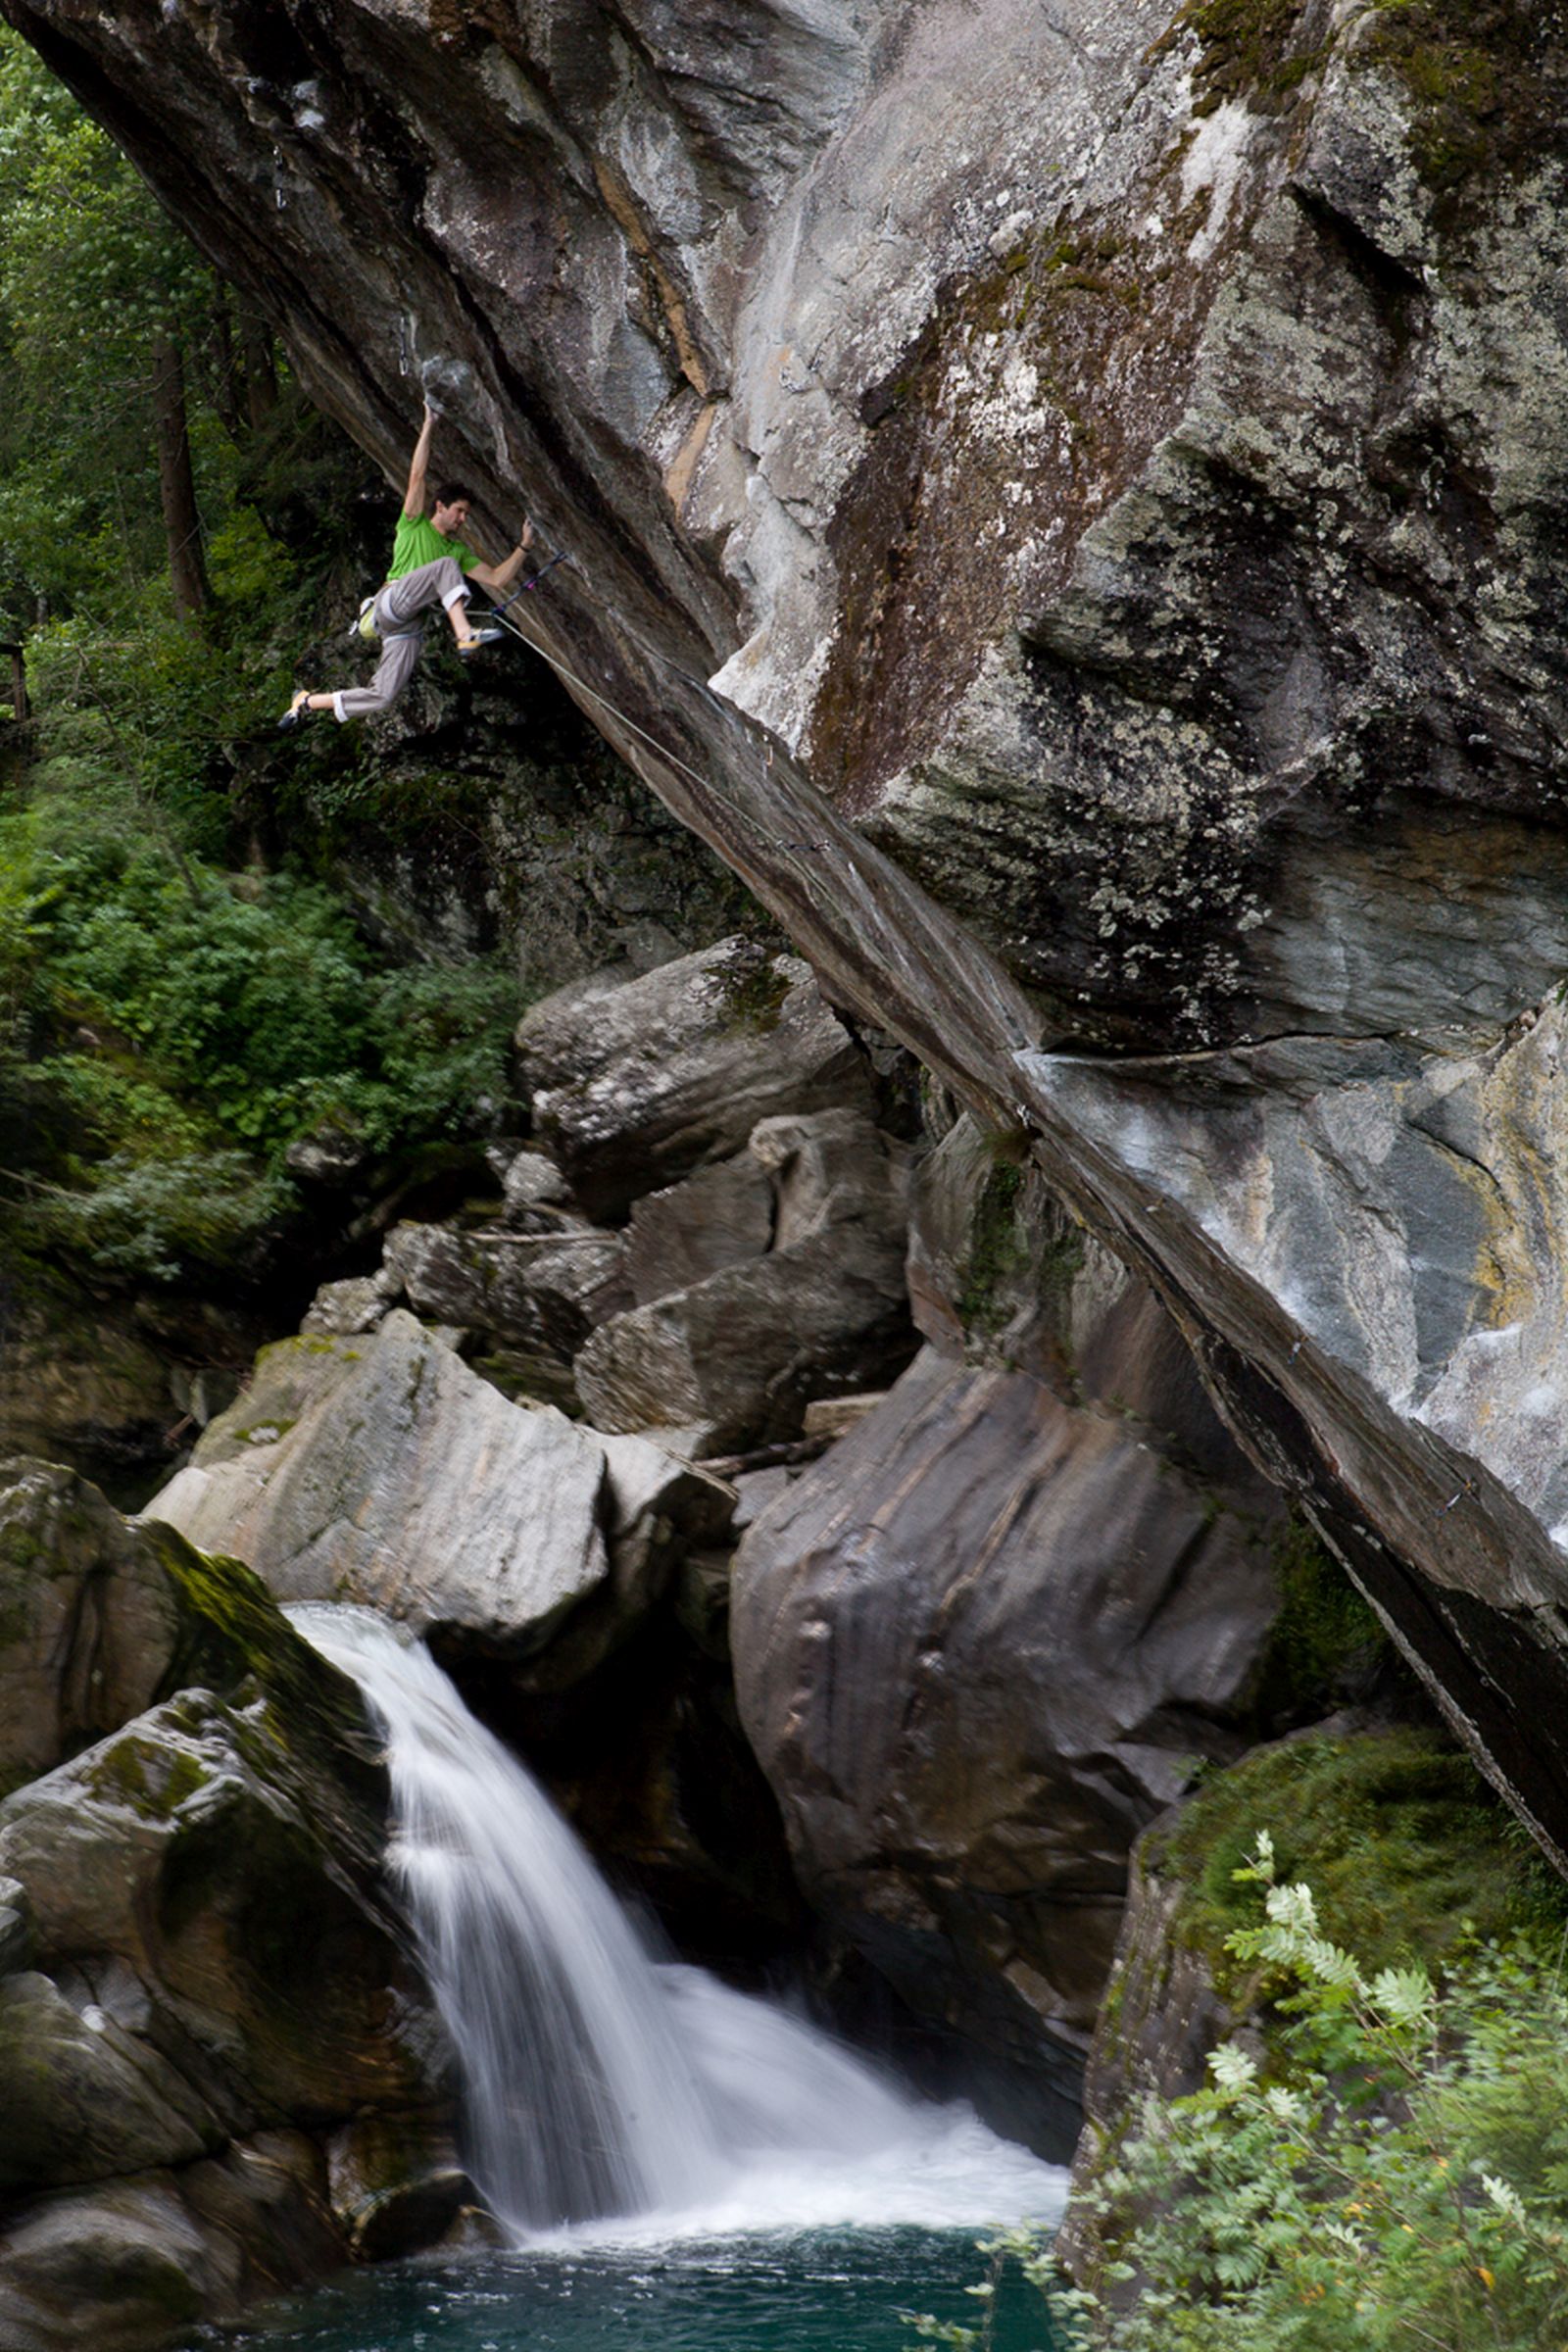 A man climbs a cliff hanging at an angle over a river.